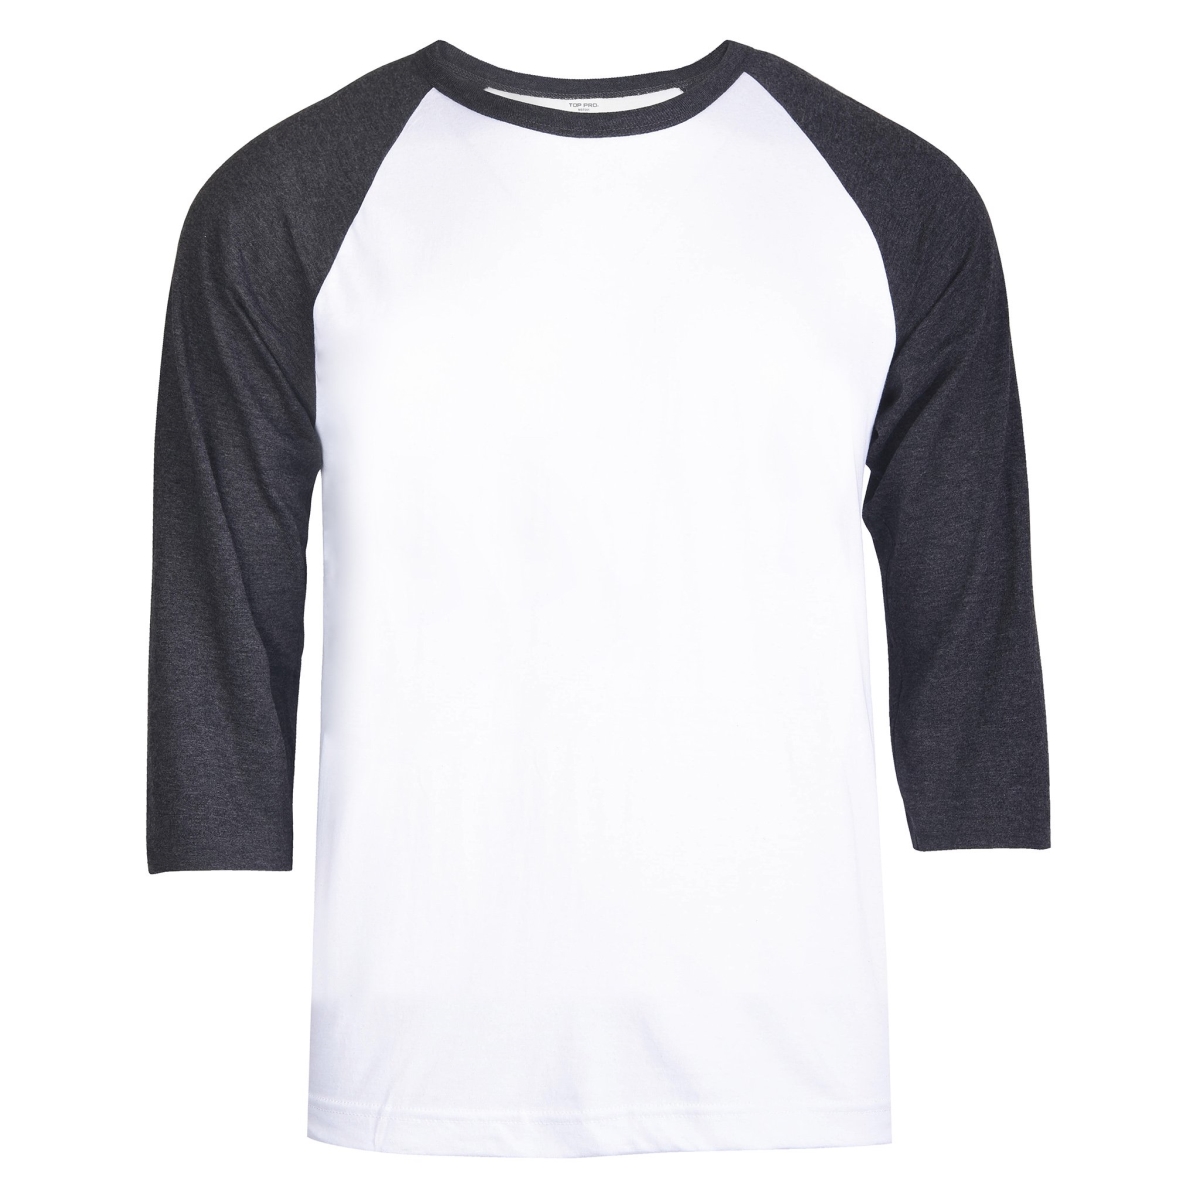 Picture of 247 Frenzy 247-MBT001 CGW-LG Mens Essentials Top Pro 0.75 Sleeve Raglan Baseball T-Shirt&#44; Charcoal Gray & White - Large